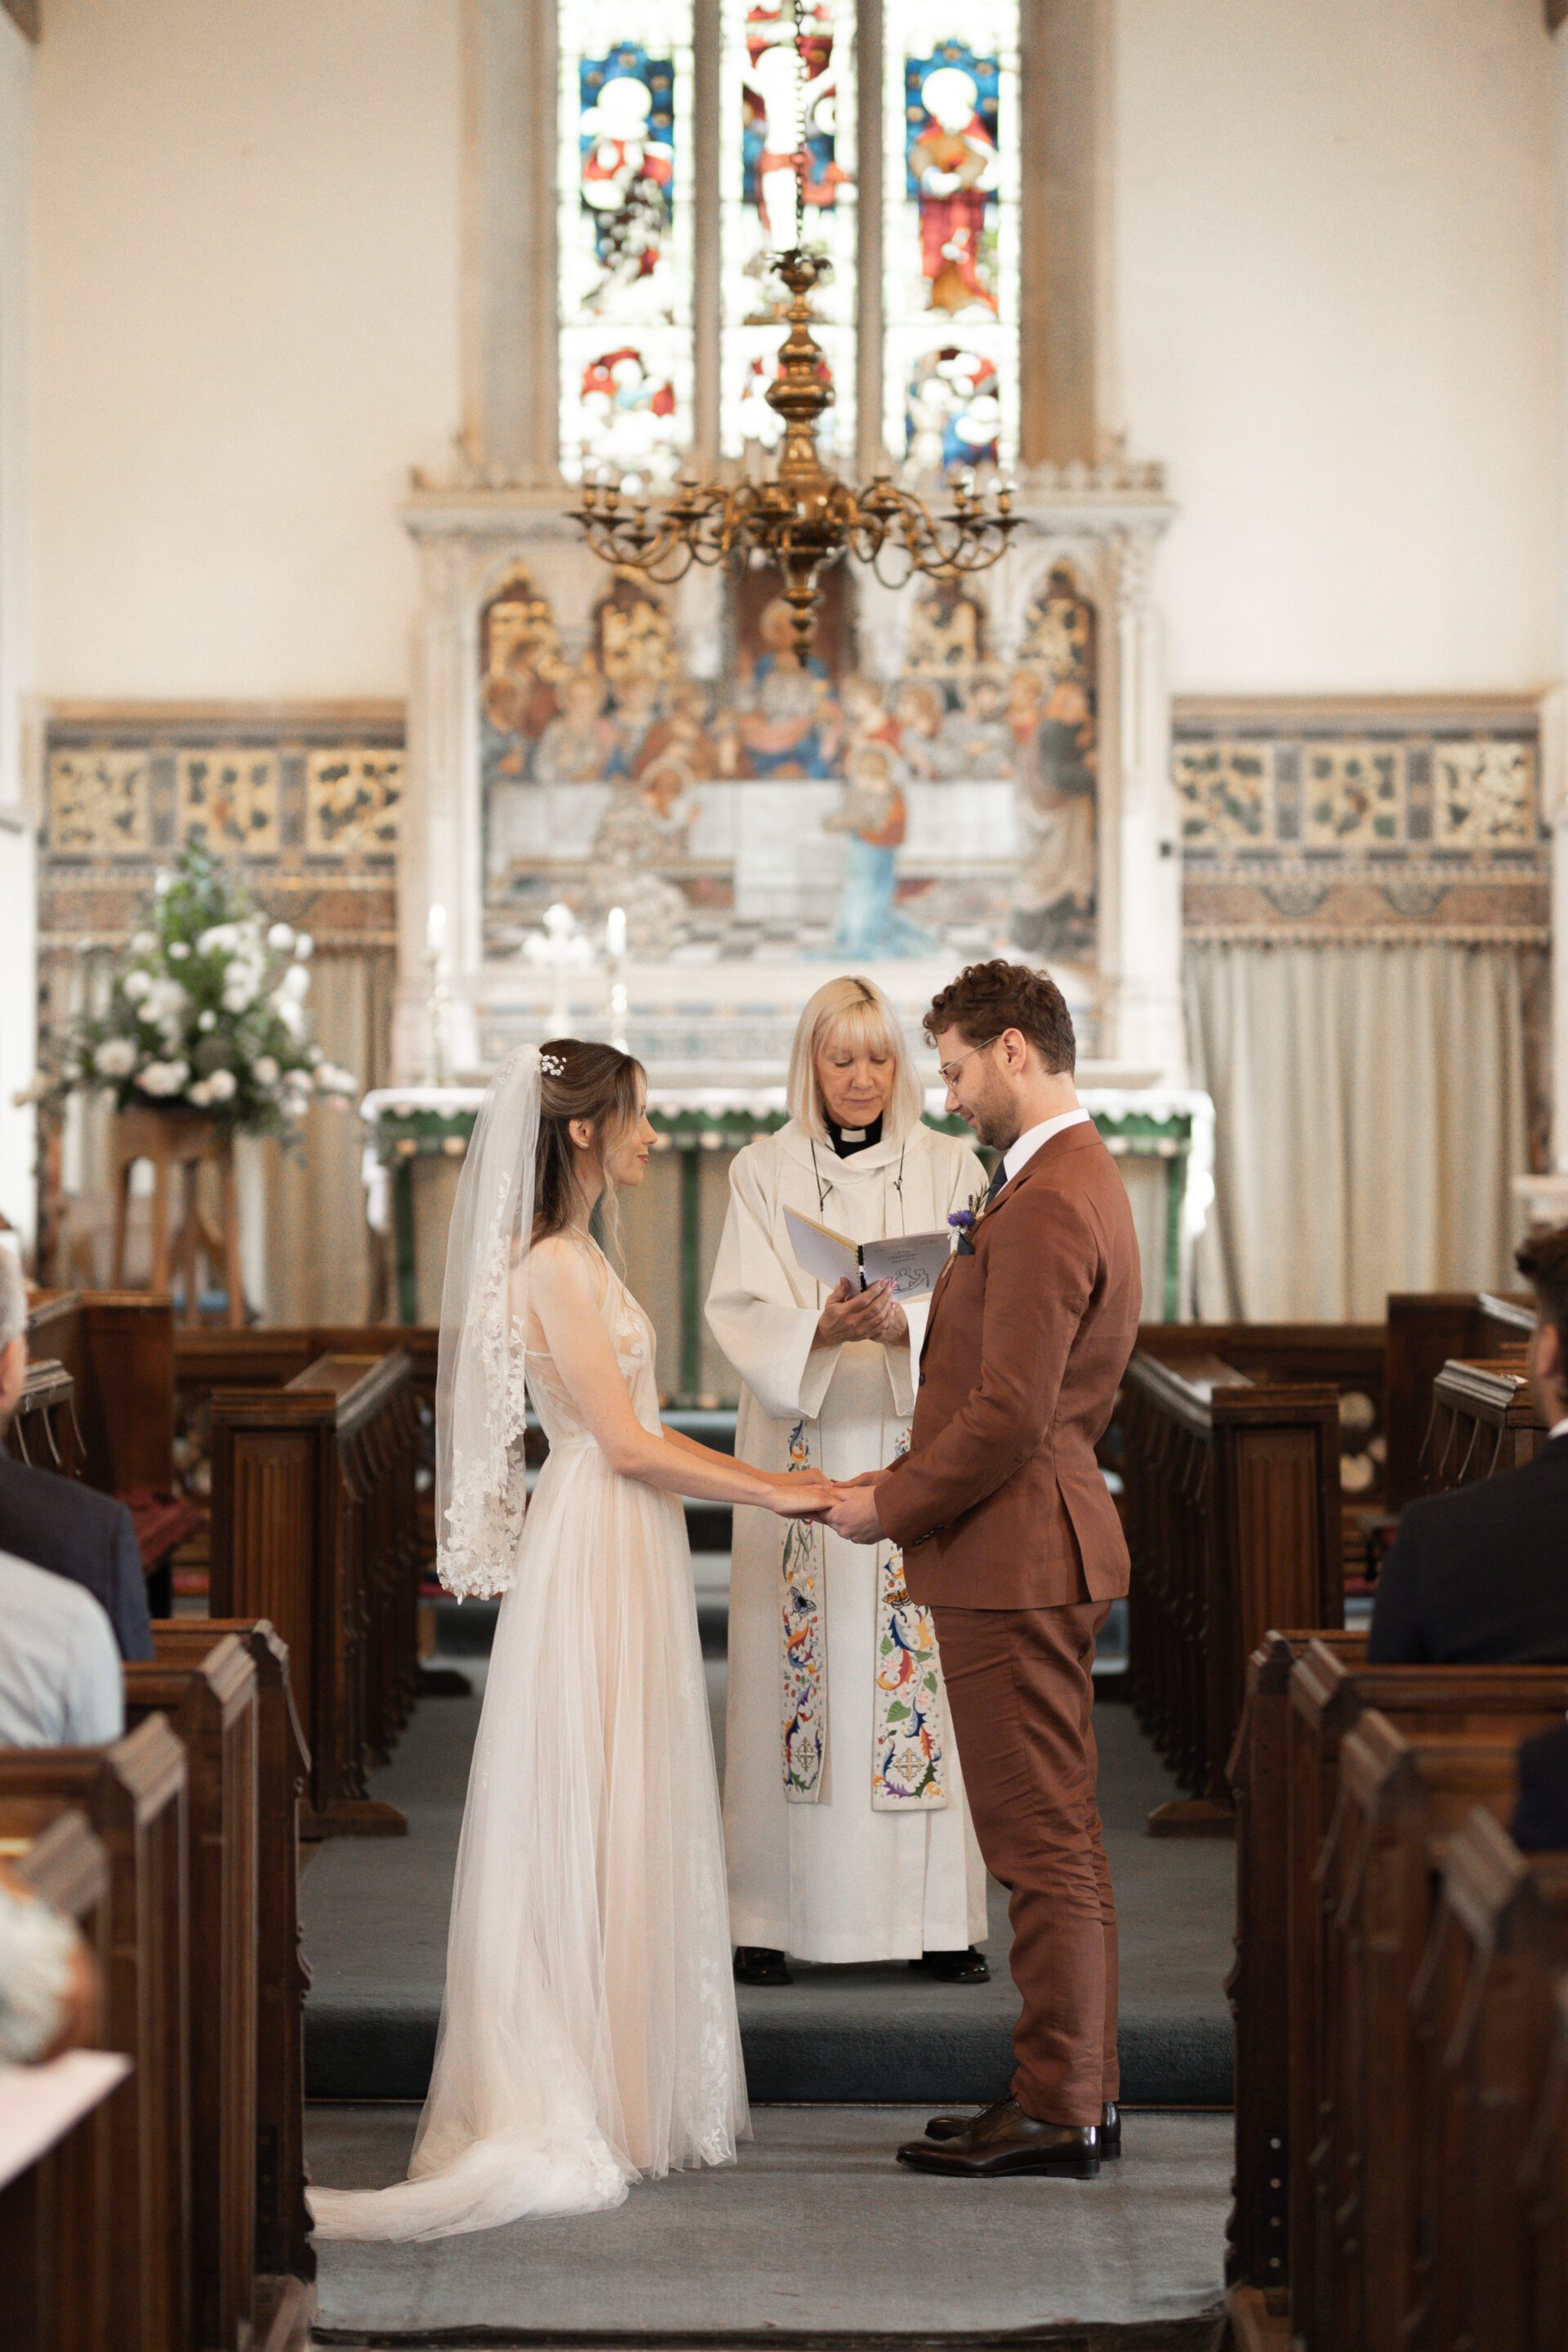 The bride and groom say their vows at their Gloucestershire church wedding